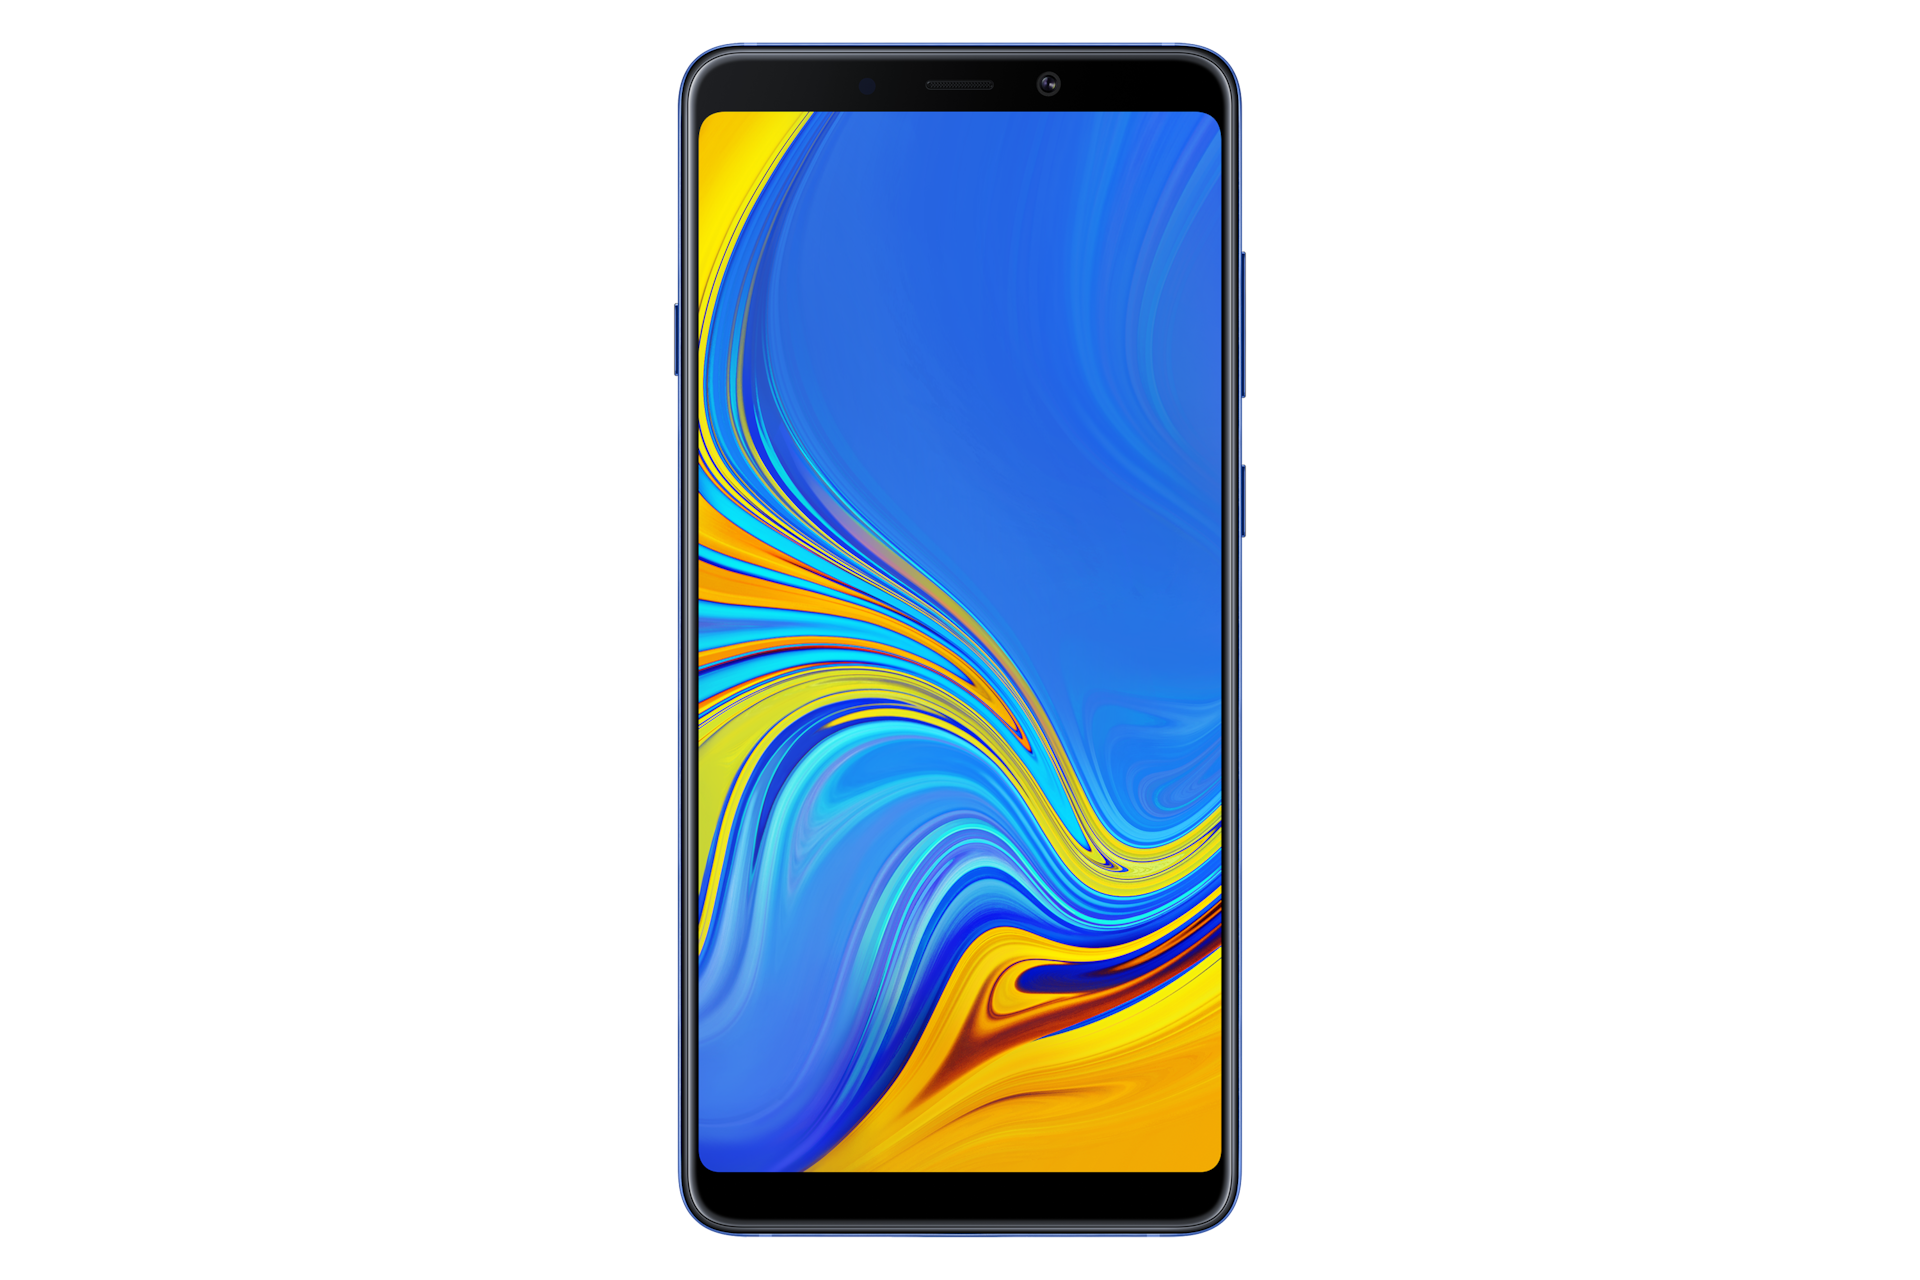 Best Buy: Samsung Galaxy A9 with 128GB Memory Cell Phone (Unlocked